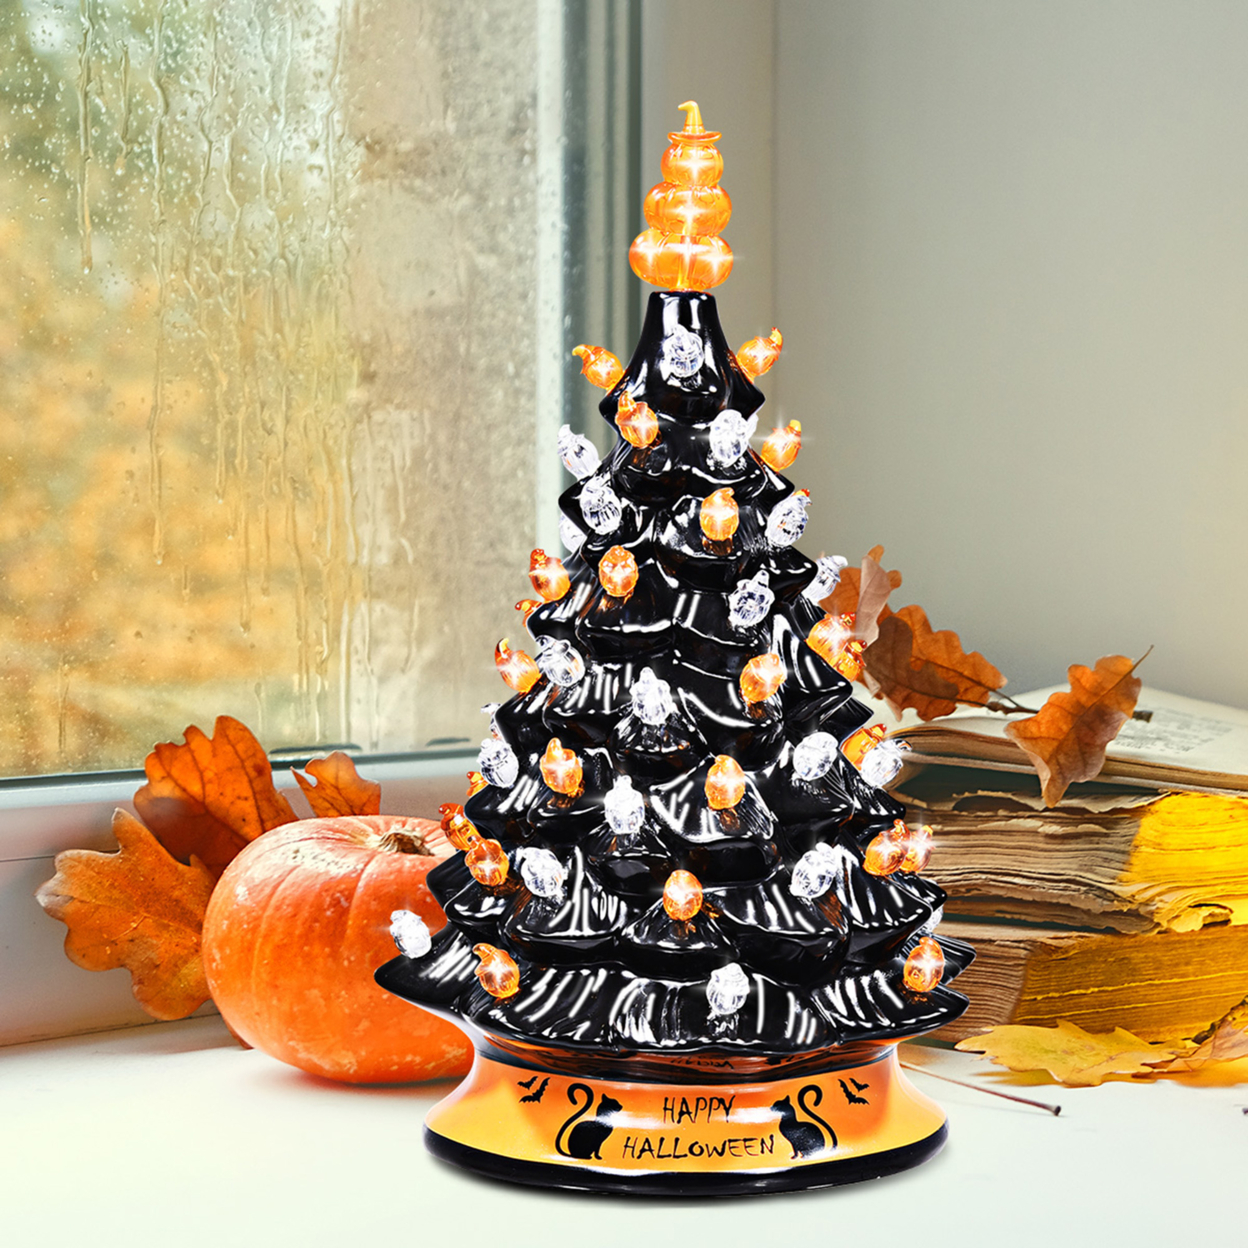 15 Inches Pre-Lit Hand-Painted Ceramic Halloween Tree Tabletop Xmas Decor